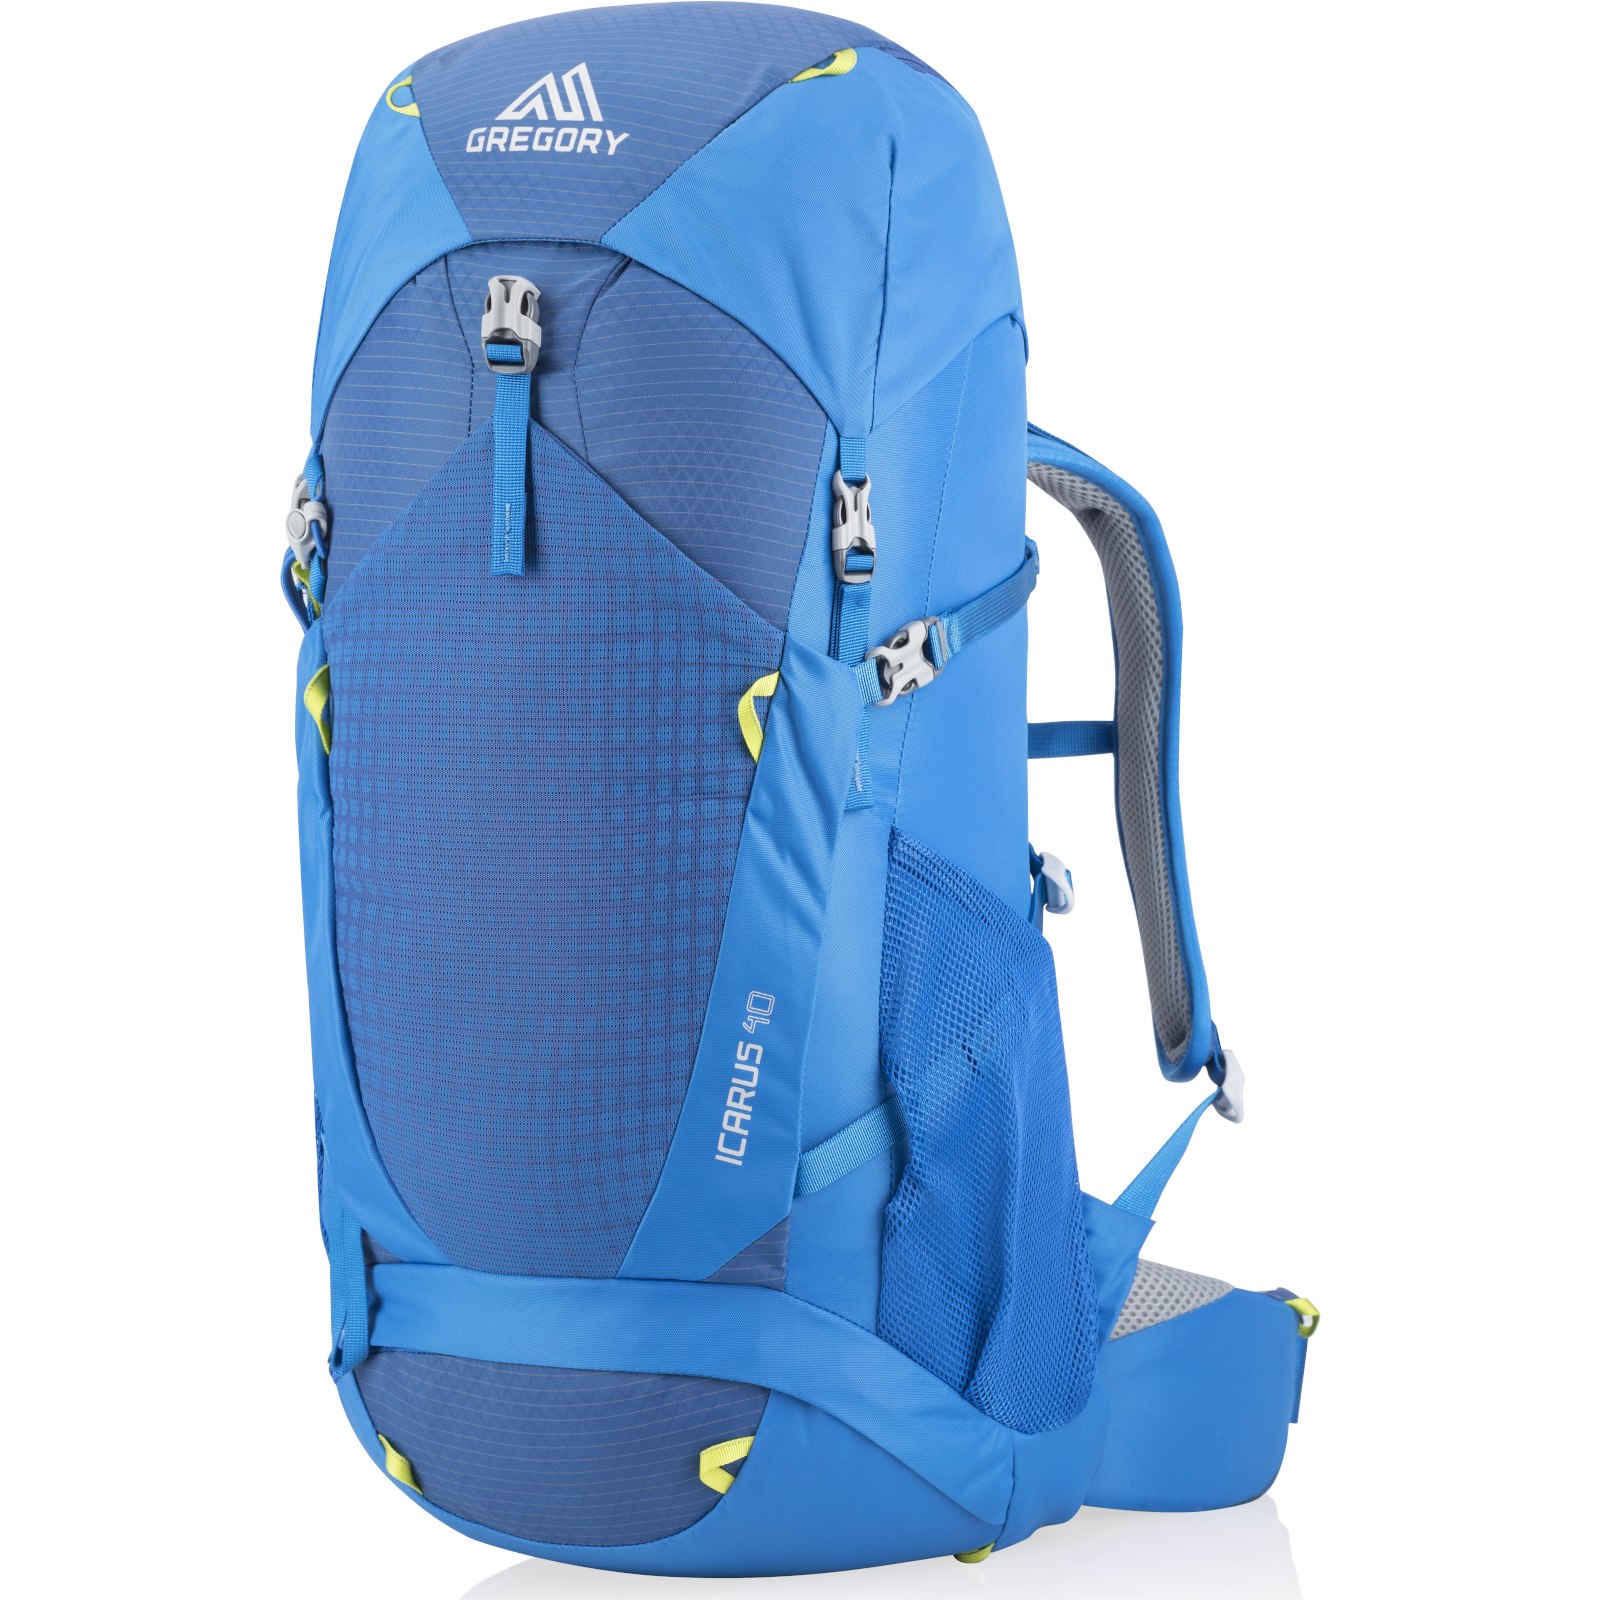 Image of Gregory Icarus 40 Youth Backpack - Hyper Blue